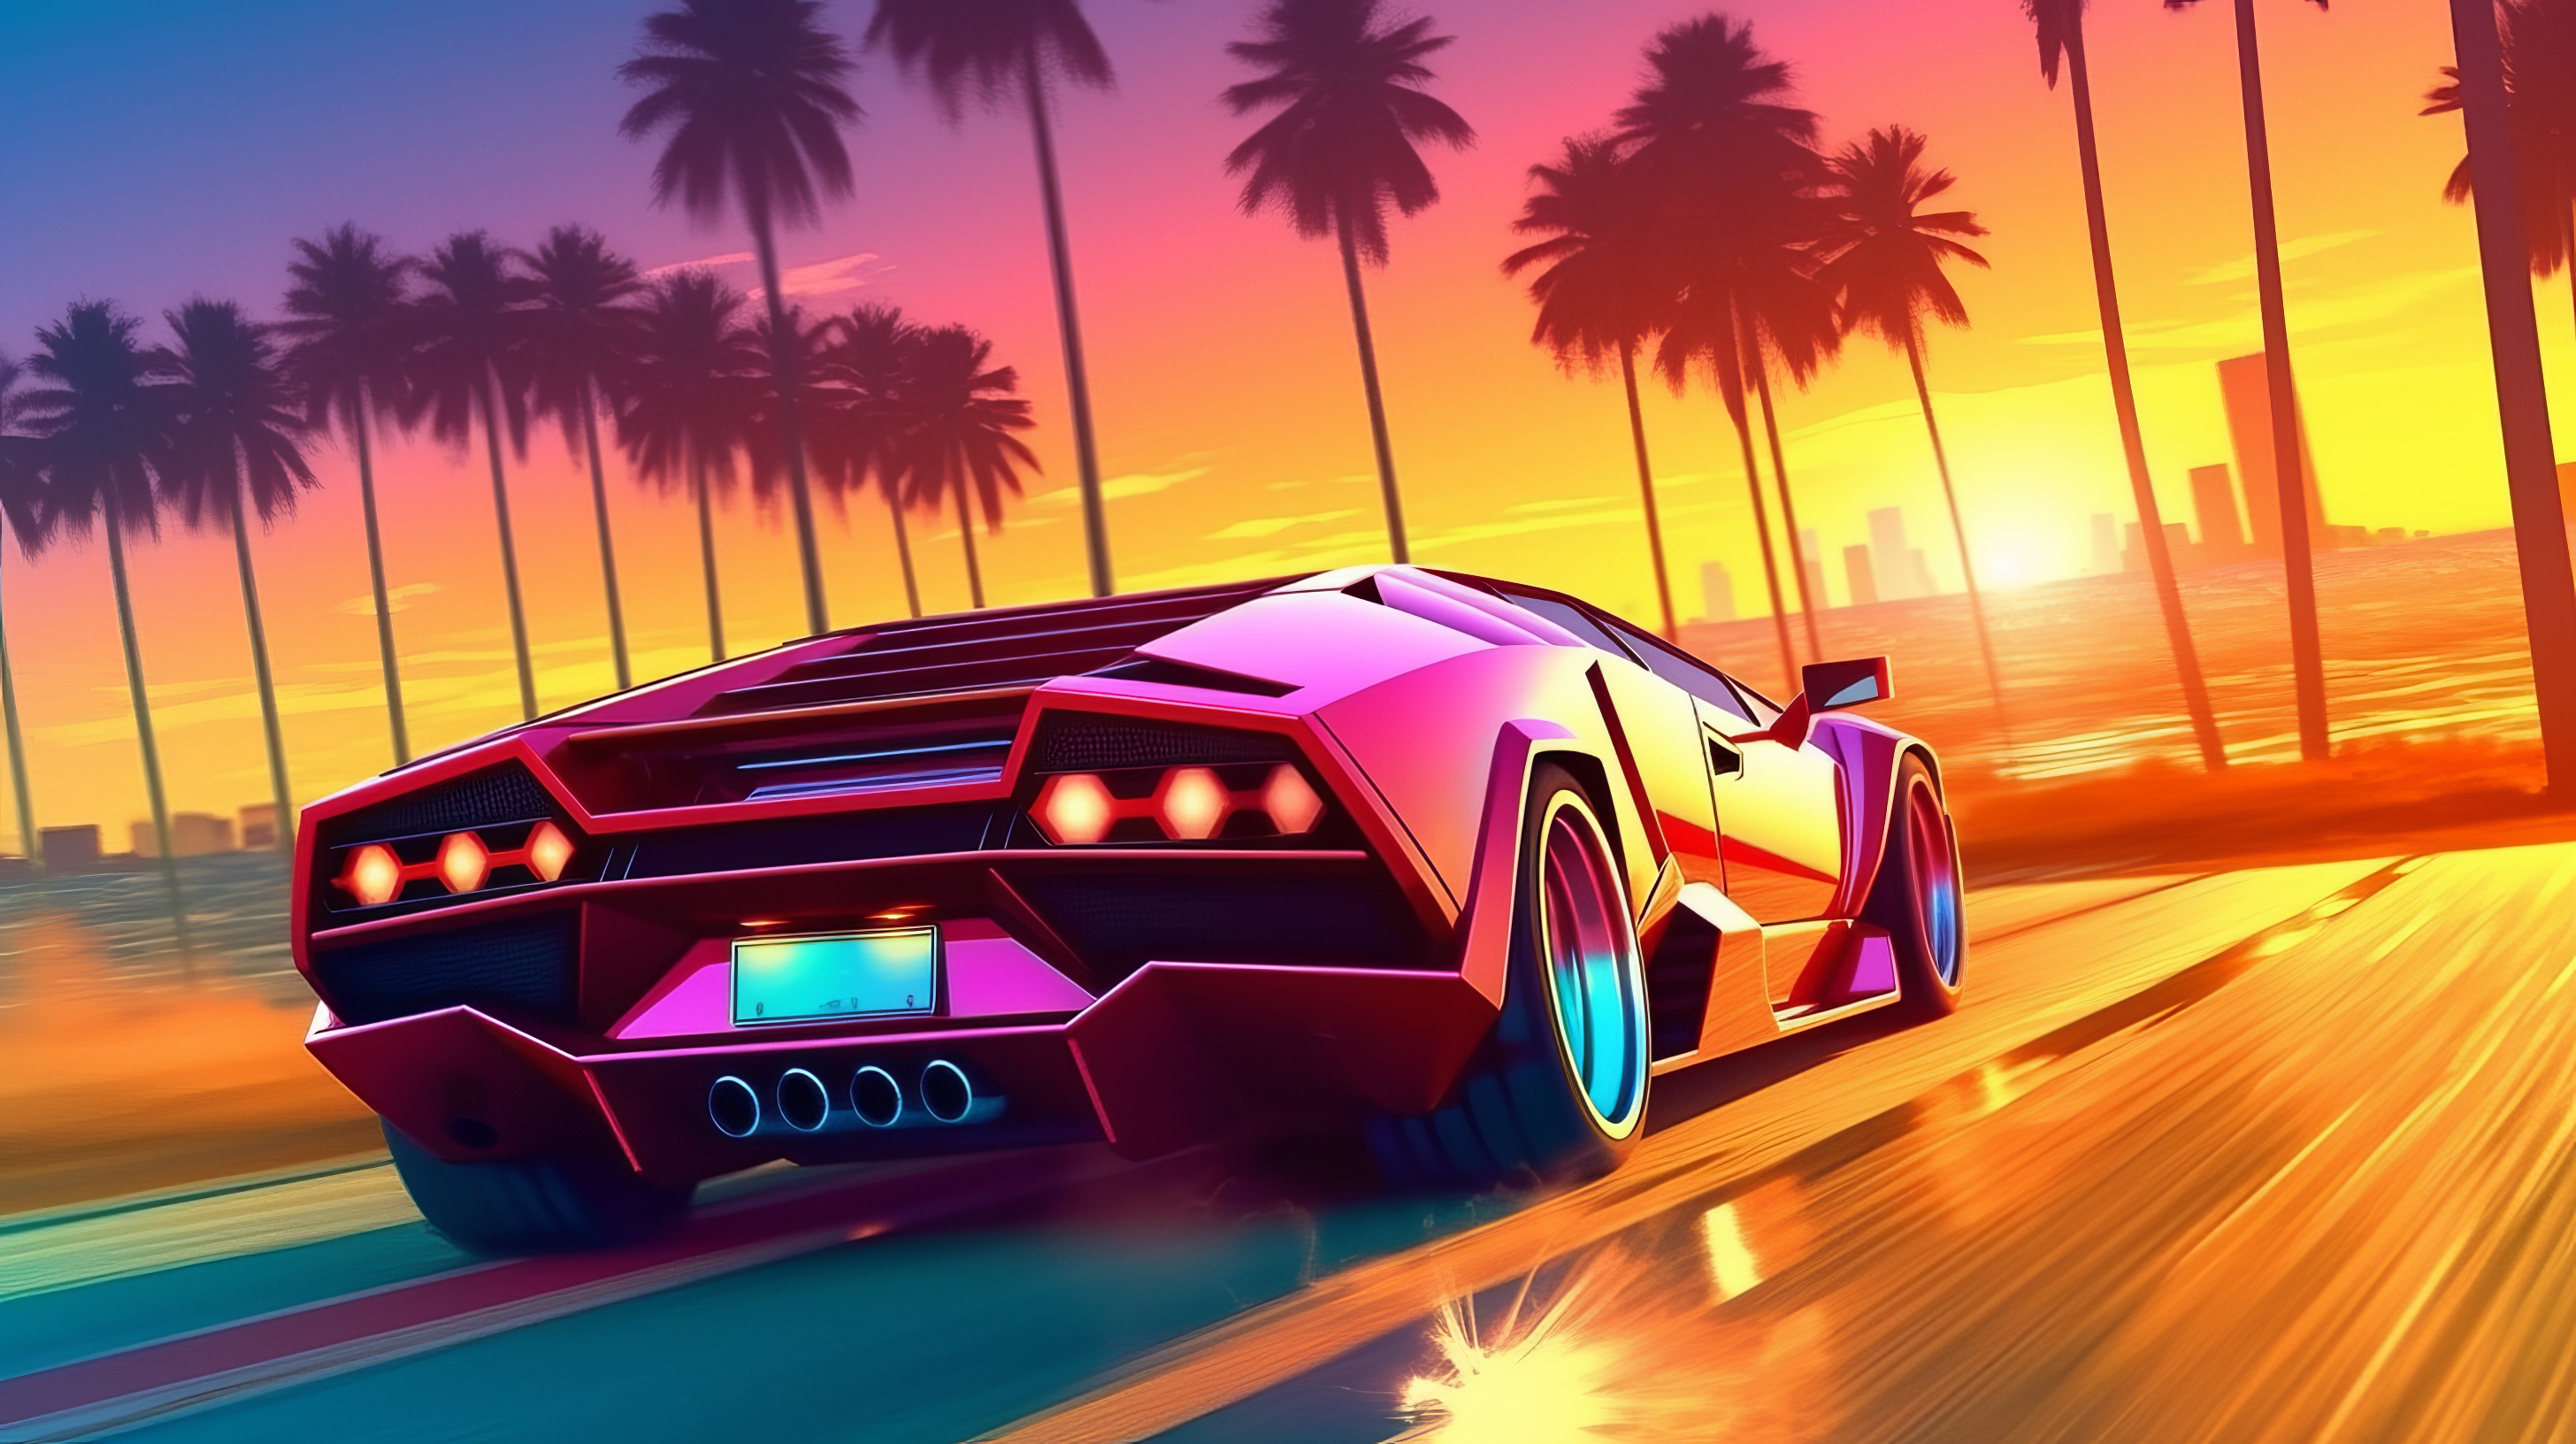 General 2912x1632 AI art illustration Lamborghini sunset palm trees driving synthwave retrowave car sunset glow rear view taillights